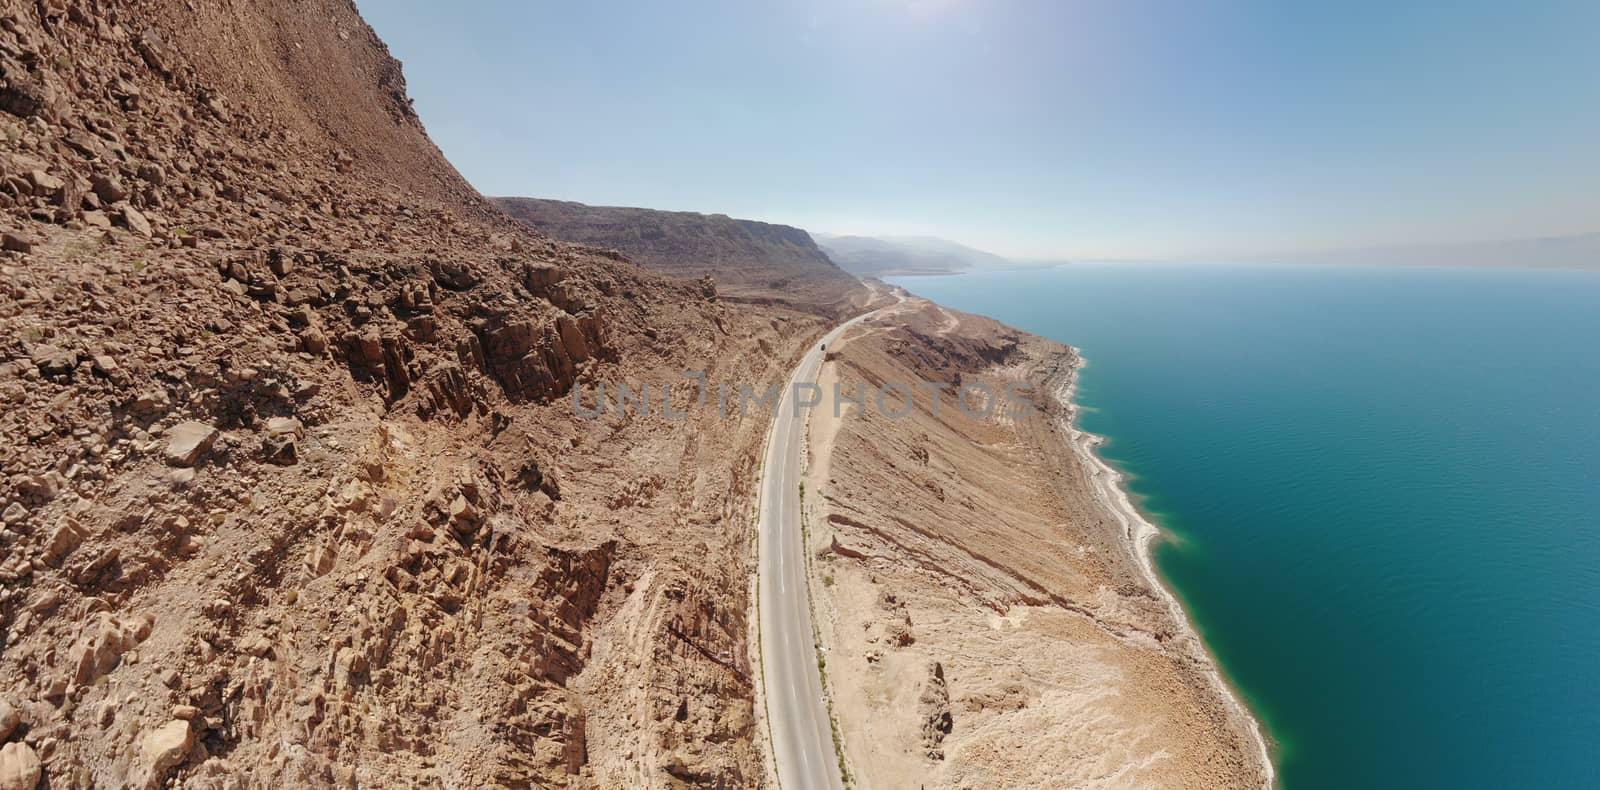 Aerial view from the main road along the Dead Sea, taken with the drone close to the rocks of the ascending mountains, Jordan